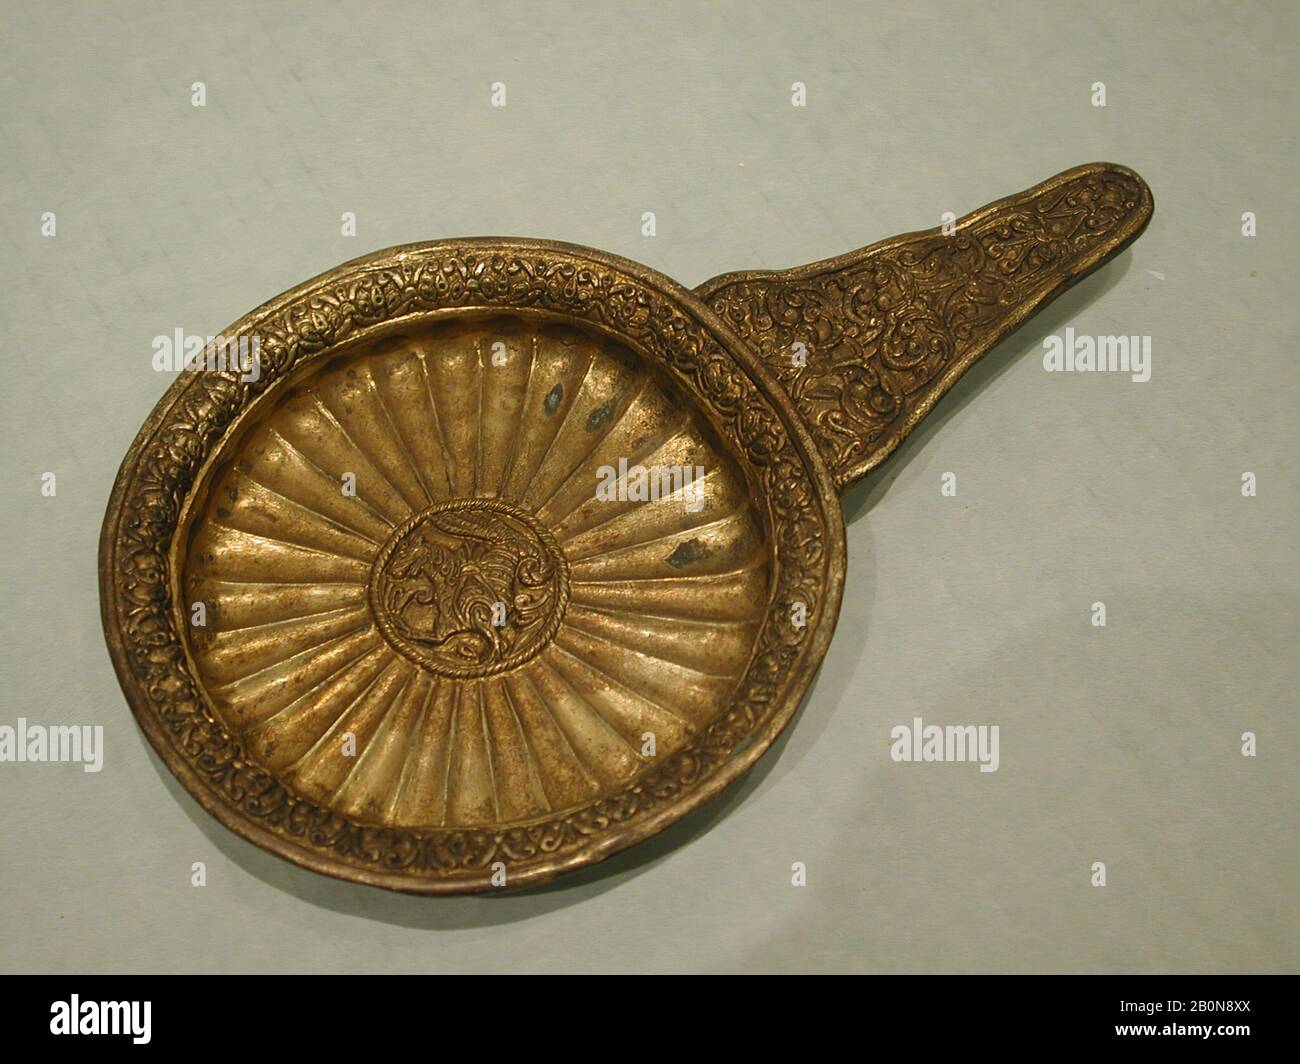 Bowl, 19th century, Plated base metal, H. 11/16 in. (1.7 cm), W. 6 3/8 in. (16.2 cm), Diam. 3 3/4 in. (9.5 cm), Reproductions Stock Photo